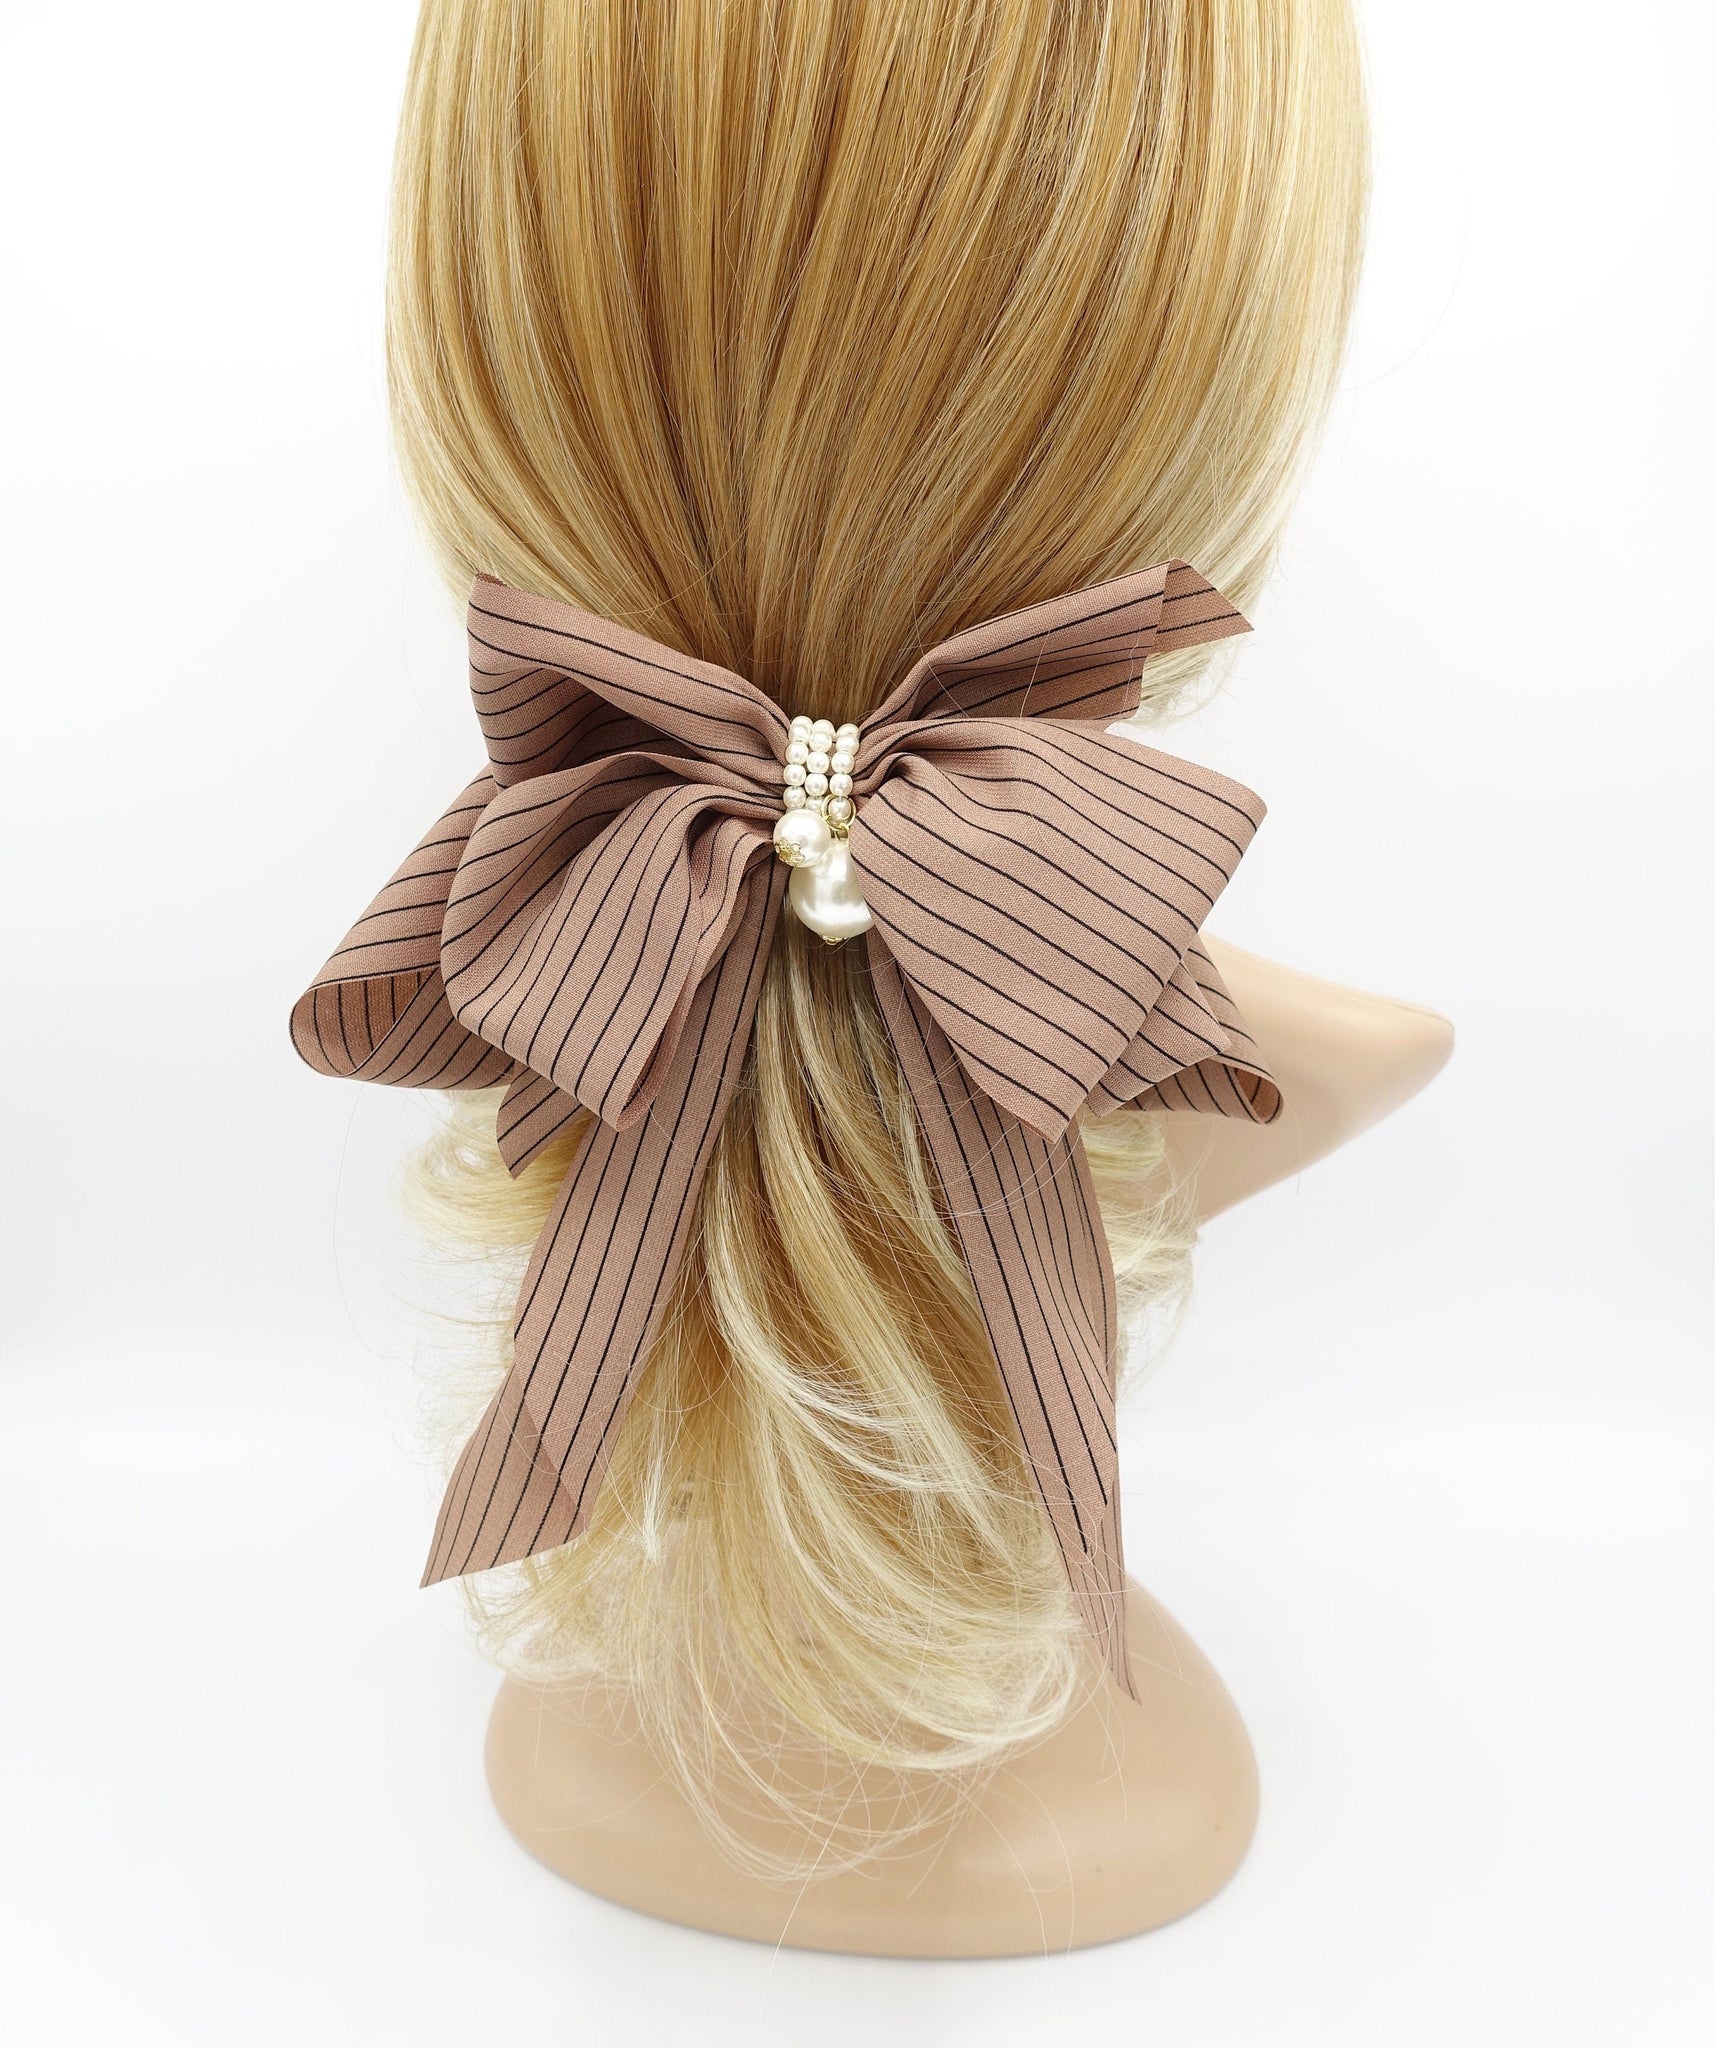 veryshine.com Barrette (Bow) Mocca beige solid classic stripe hair bow long tail french barrette women hair accessory